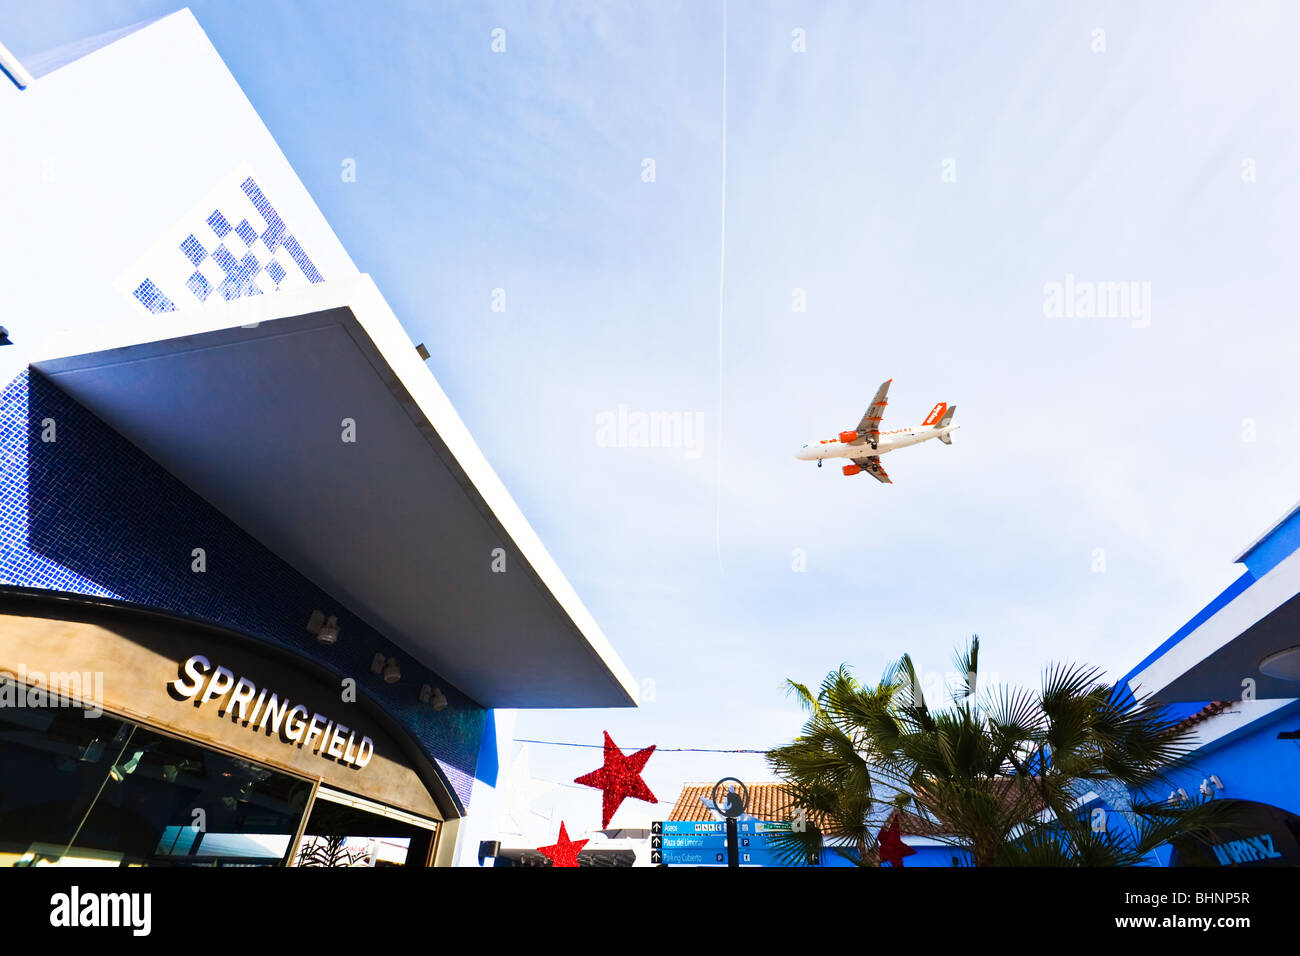 EasyJet aeroplane flying over Plaza Mayor shopping centre, Malaga, Costa del Sol, Spain. Springfield shop in foreground. Stock Photo